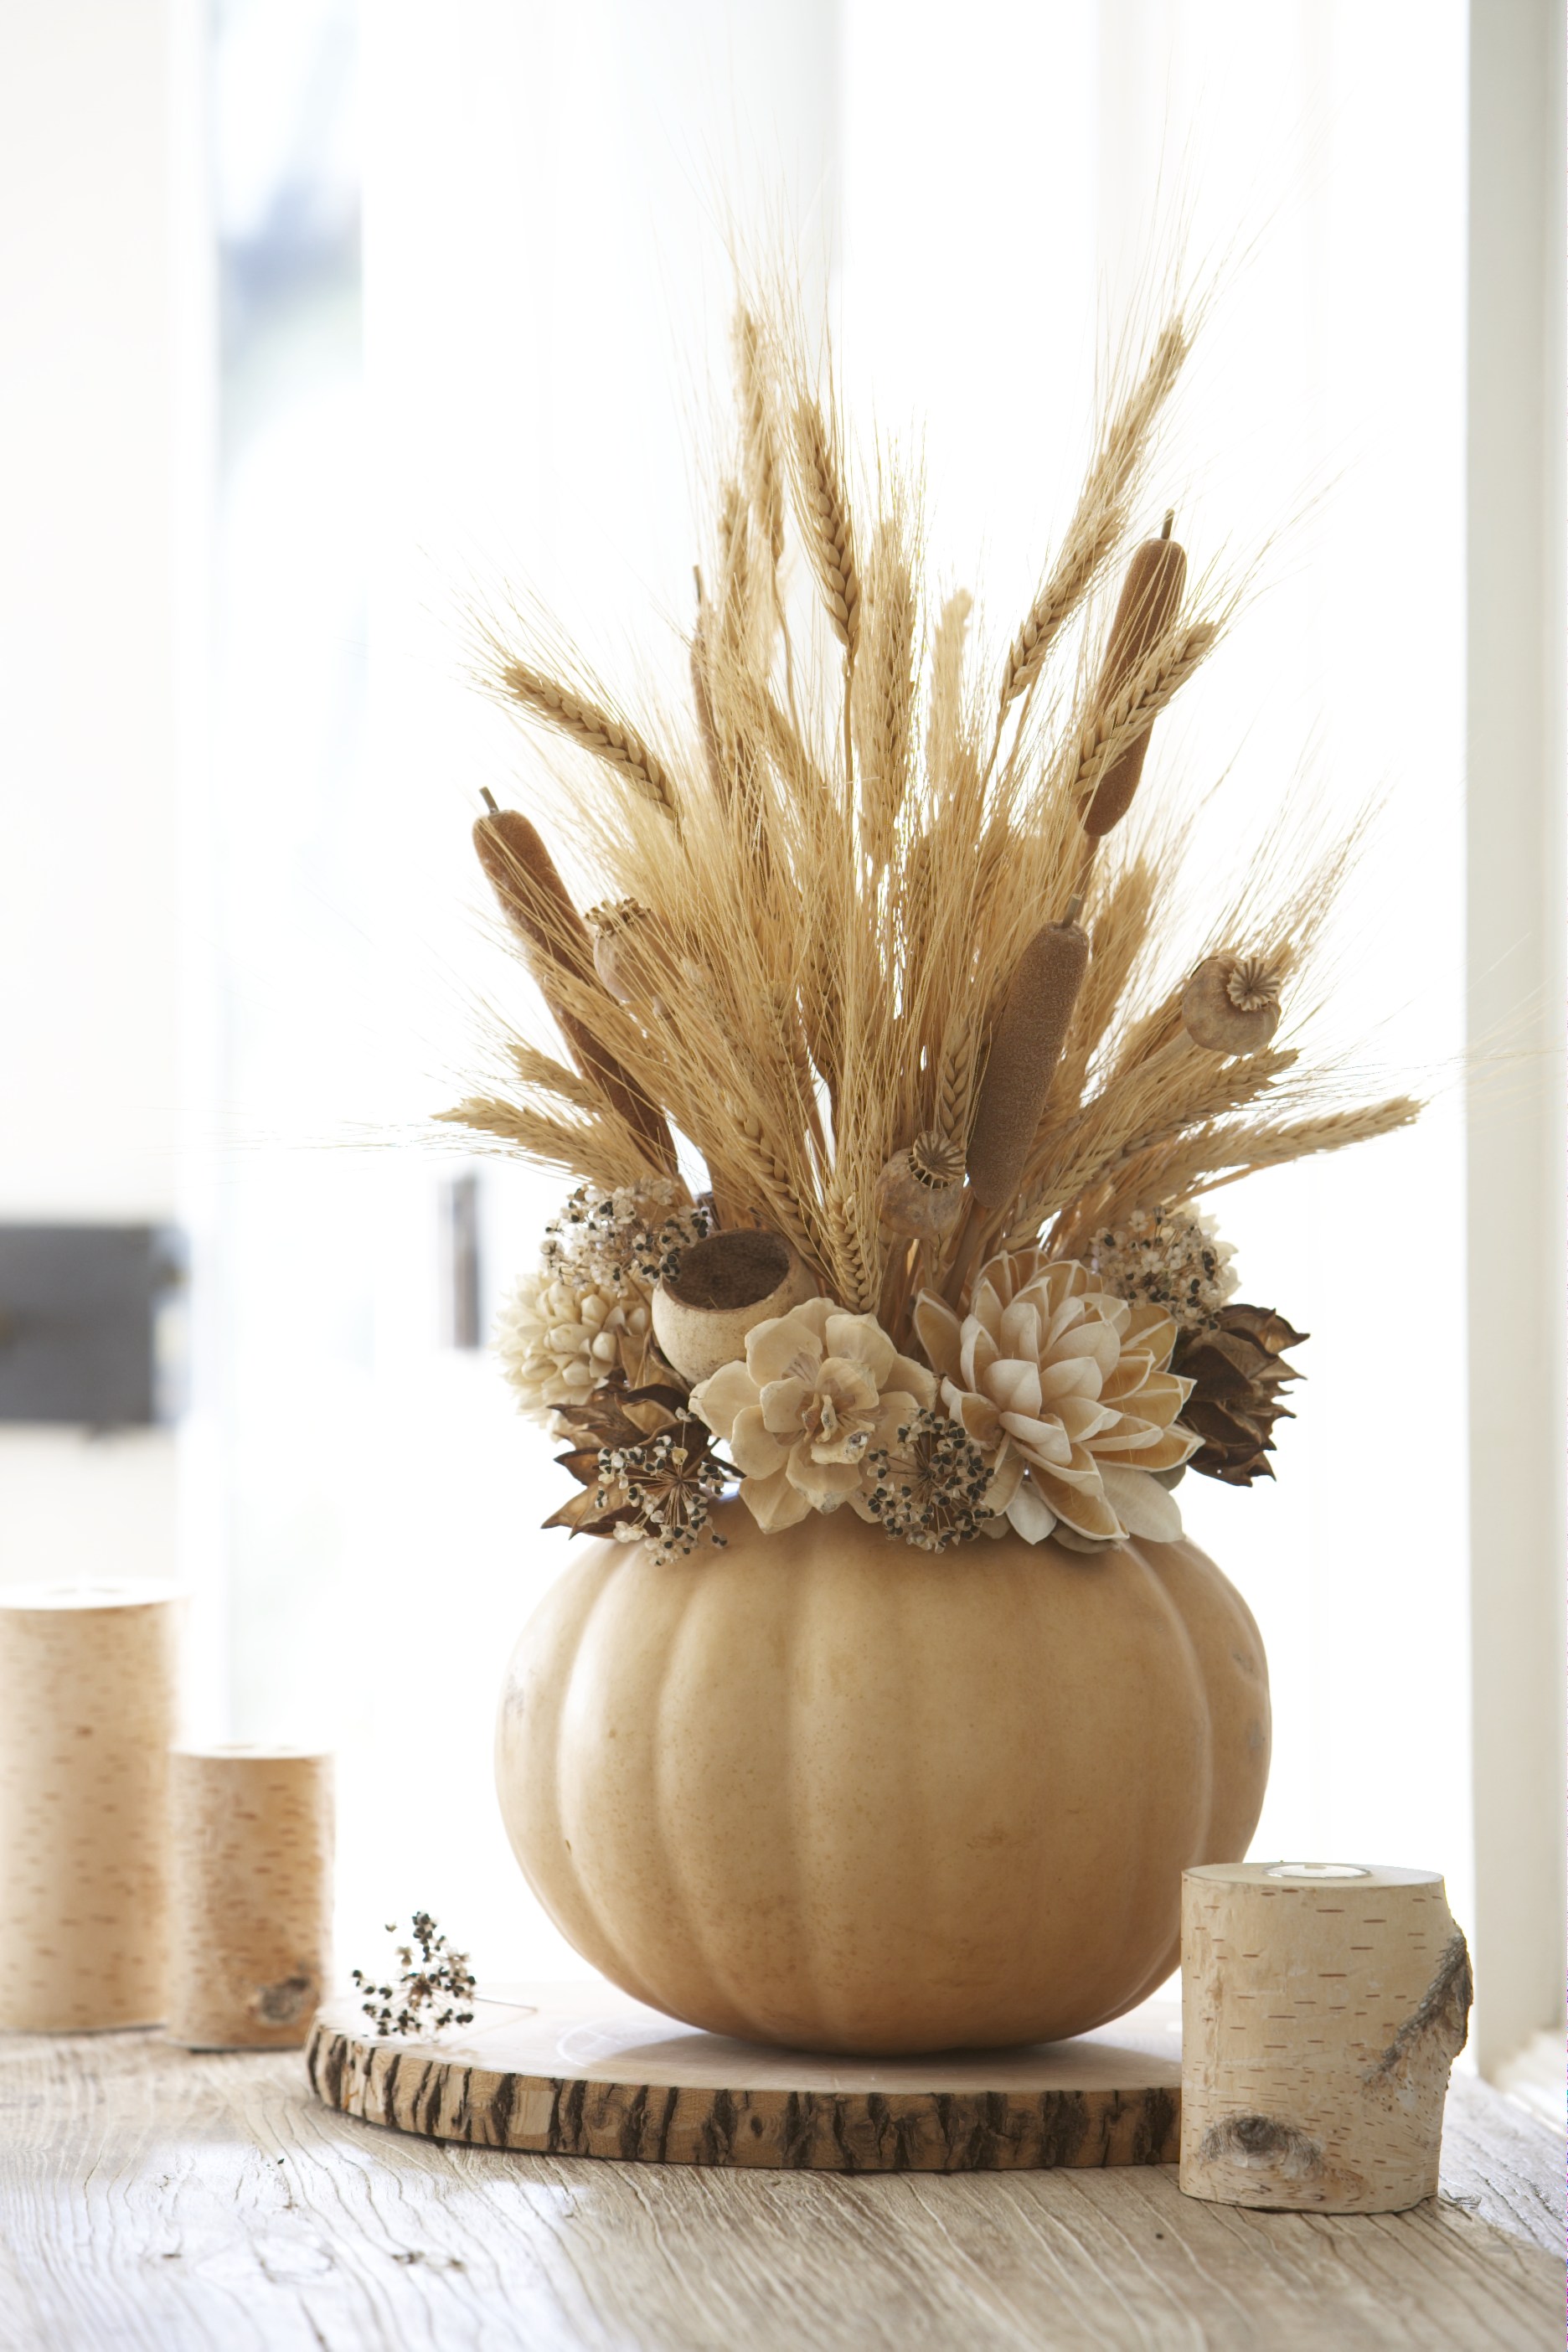 Dried wheat stems and faux flowers in beige and brown tones could be perfect additions to a subtle, natural looking Fall centerpiece.